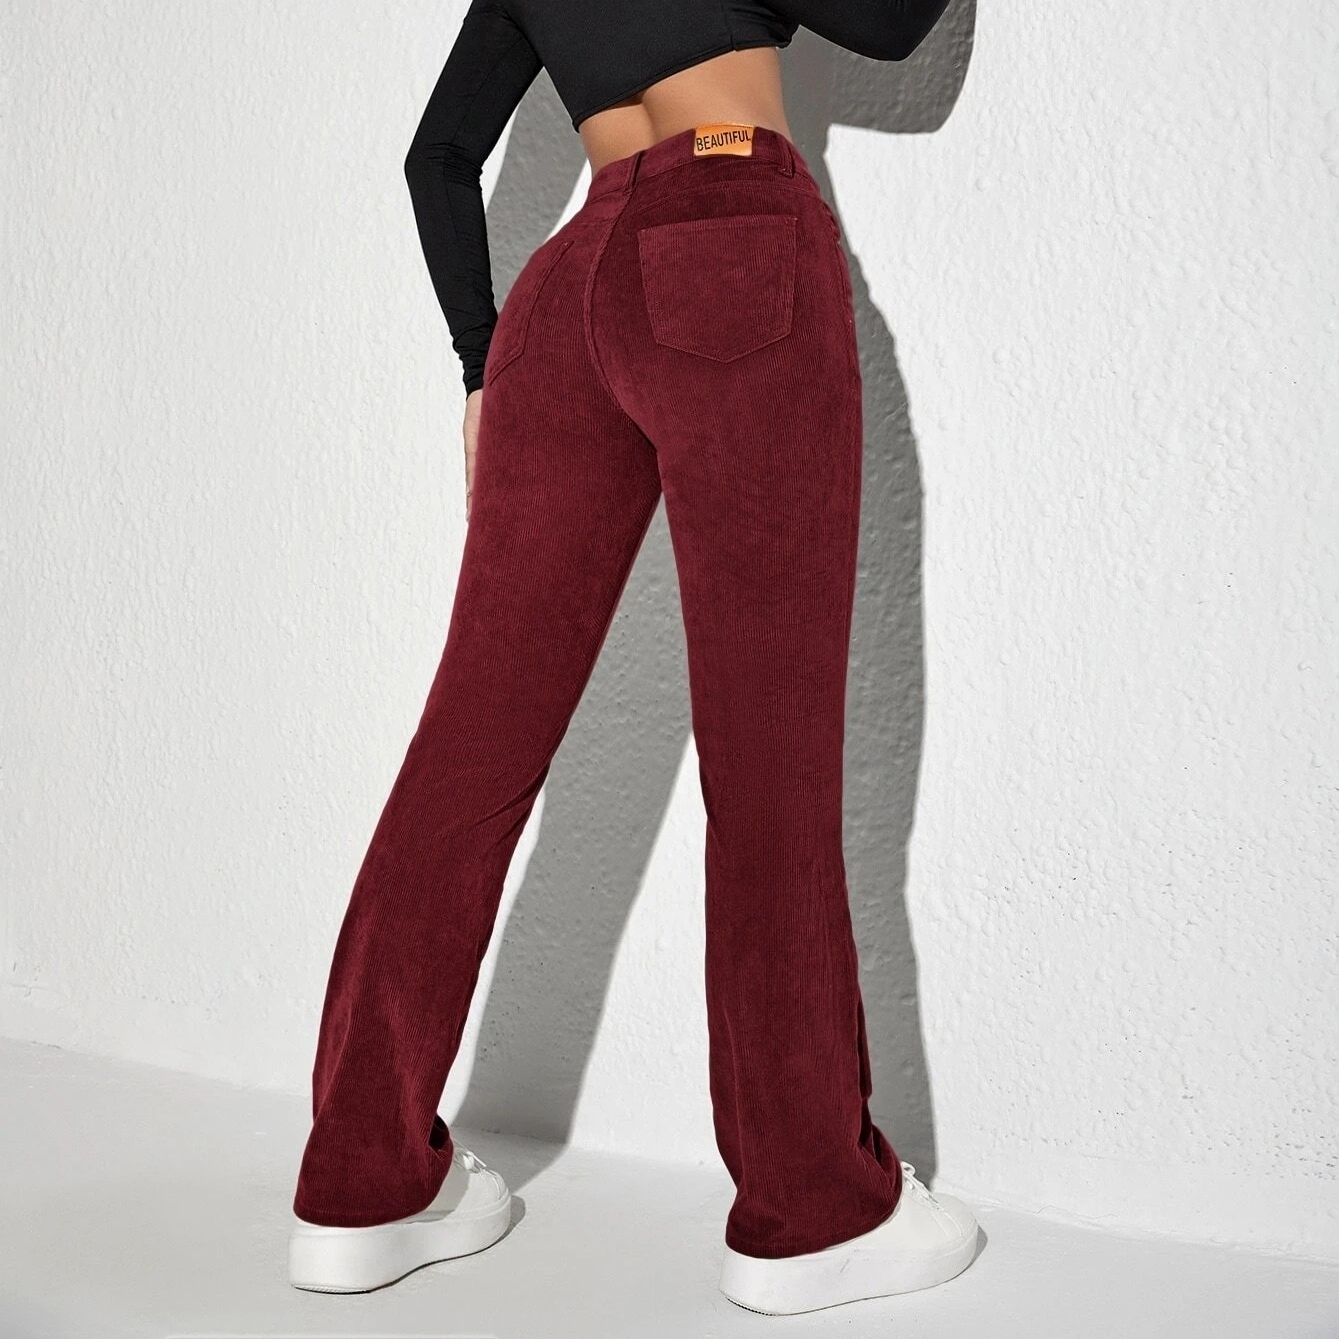 Letter Patched Flare Leg Corduroy Pants - Burgundy, S